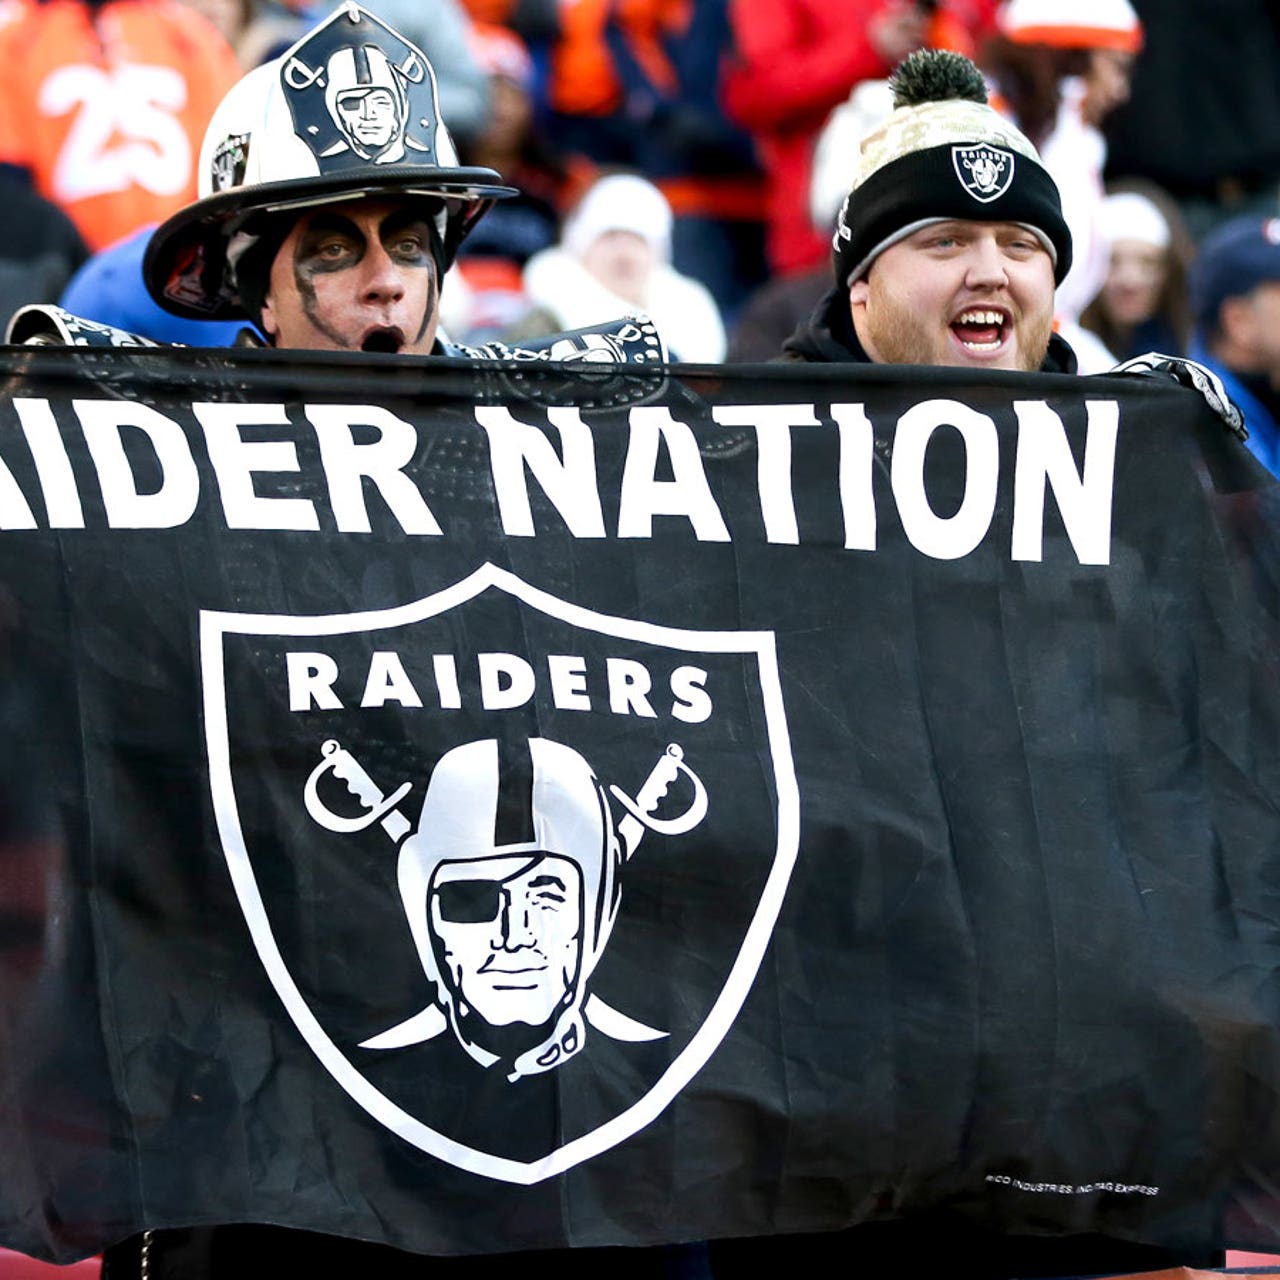 Report: NFL owners had concerns about Raiders and gang culture in